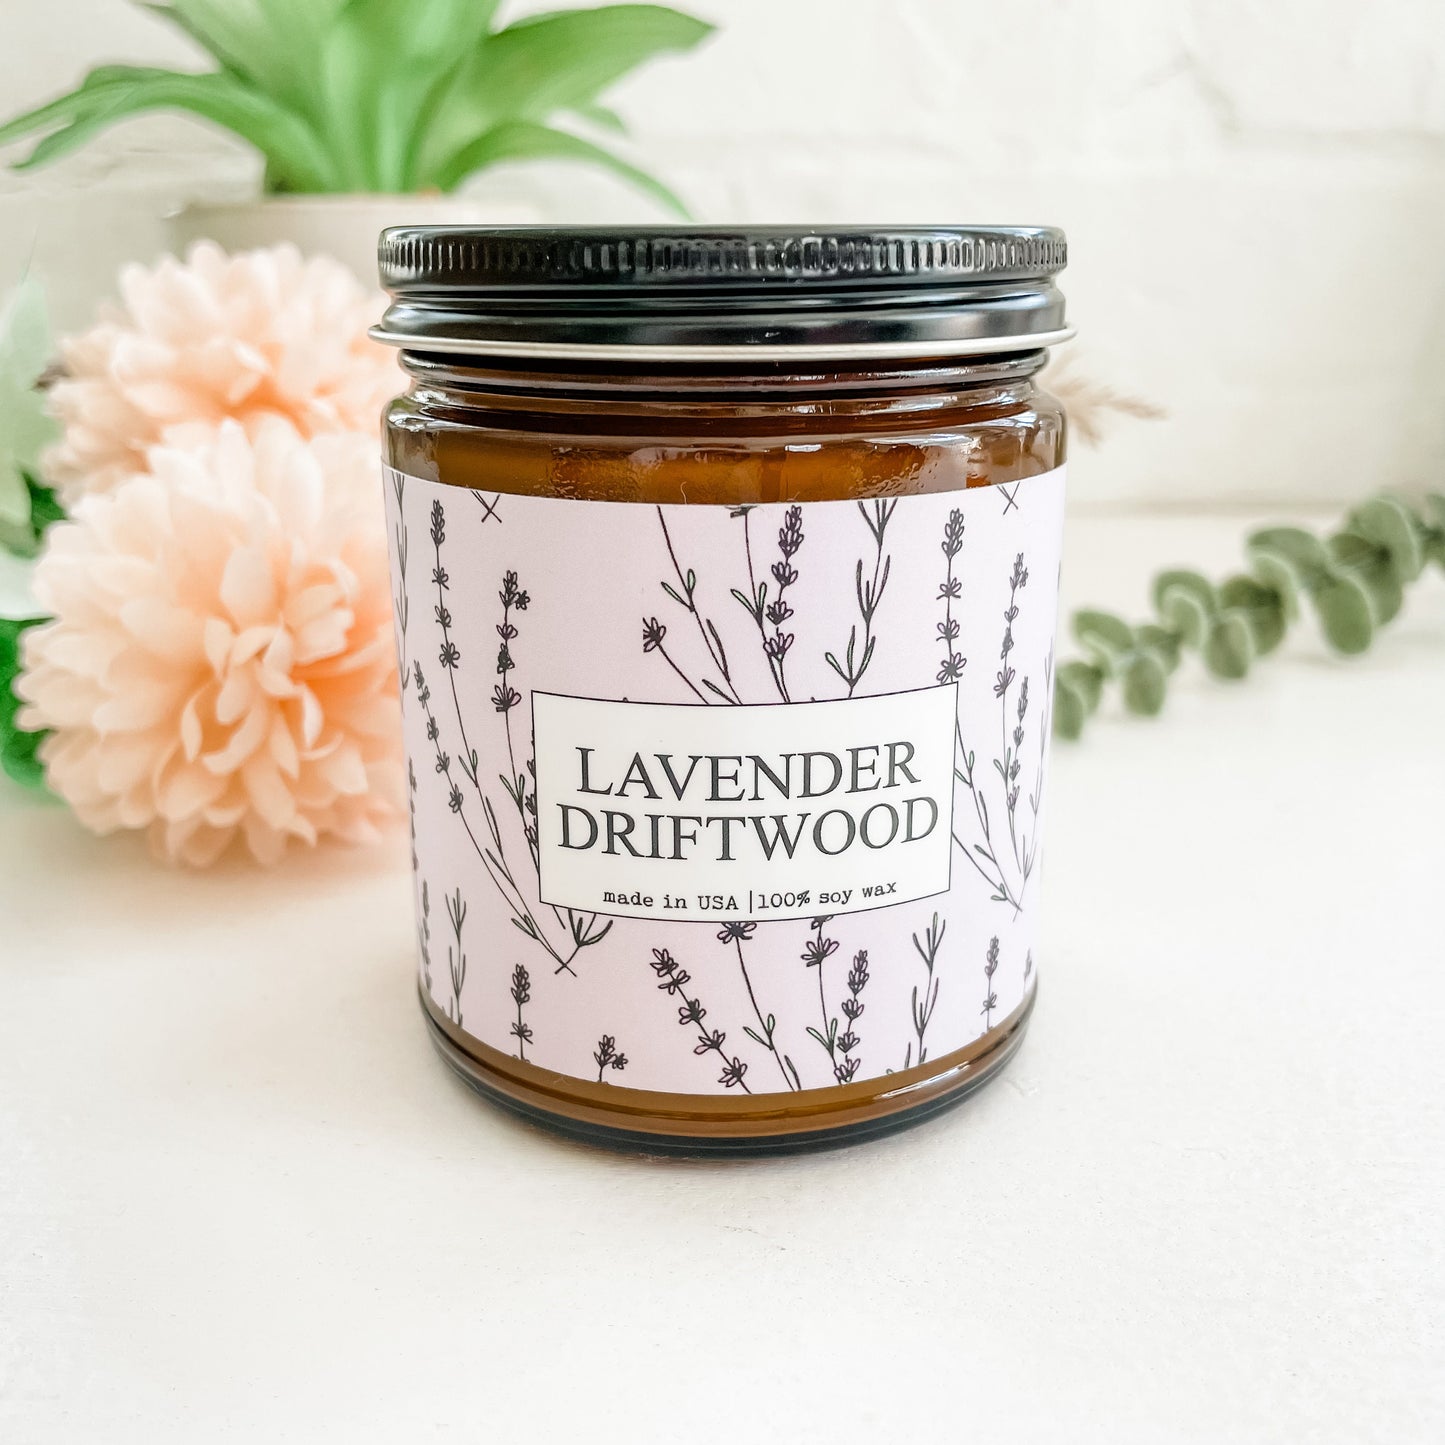 Lavender Driftwood Scented Candle - 9oz Glass Jar Soy Candle